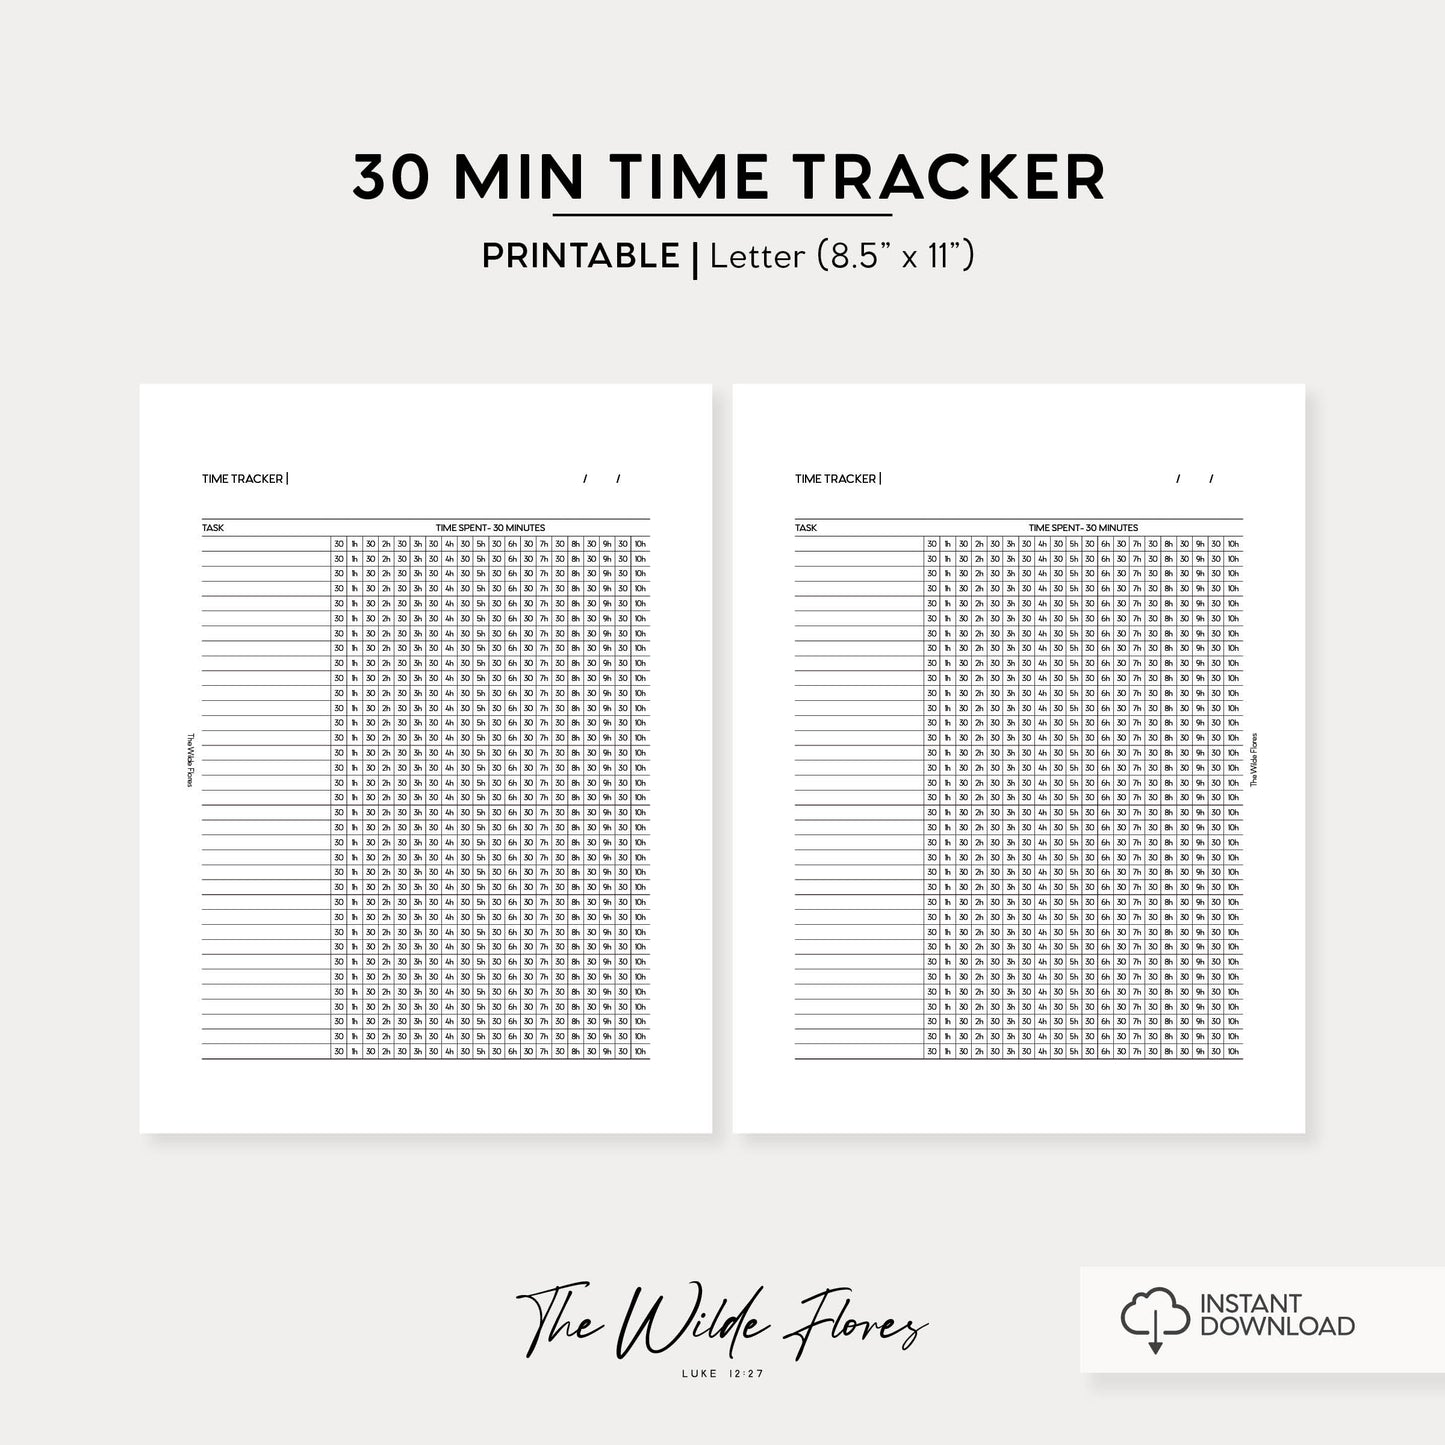 30 Minute Time Tracker: Letter Size Printable